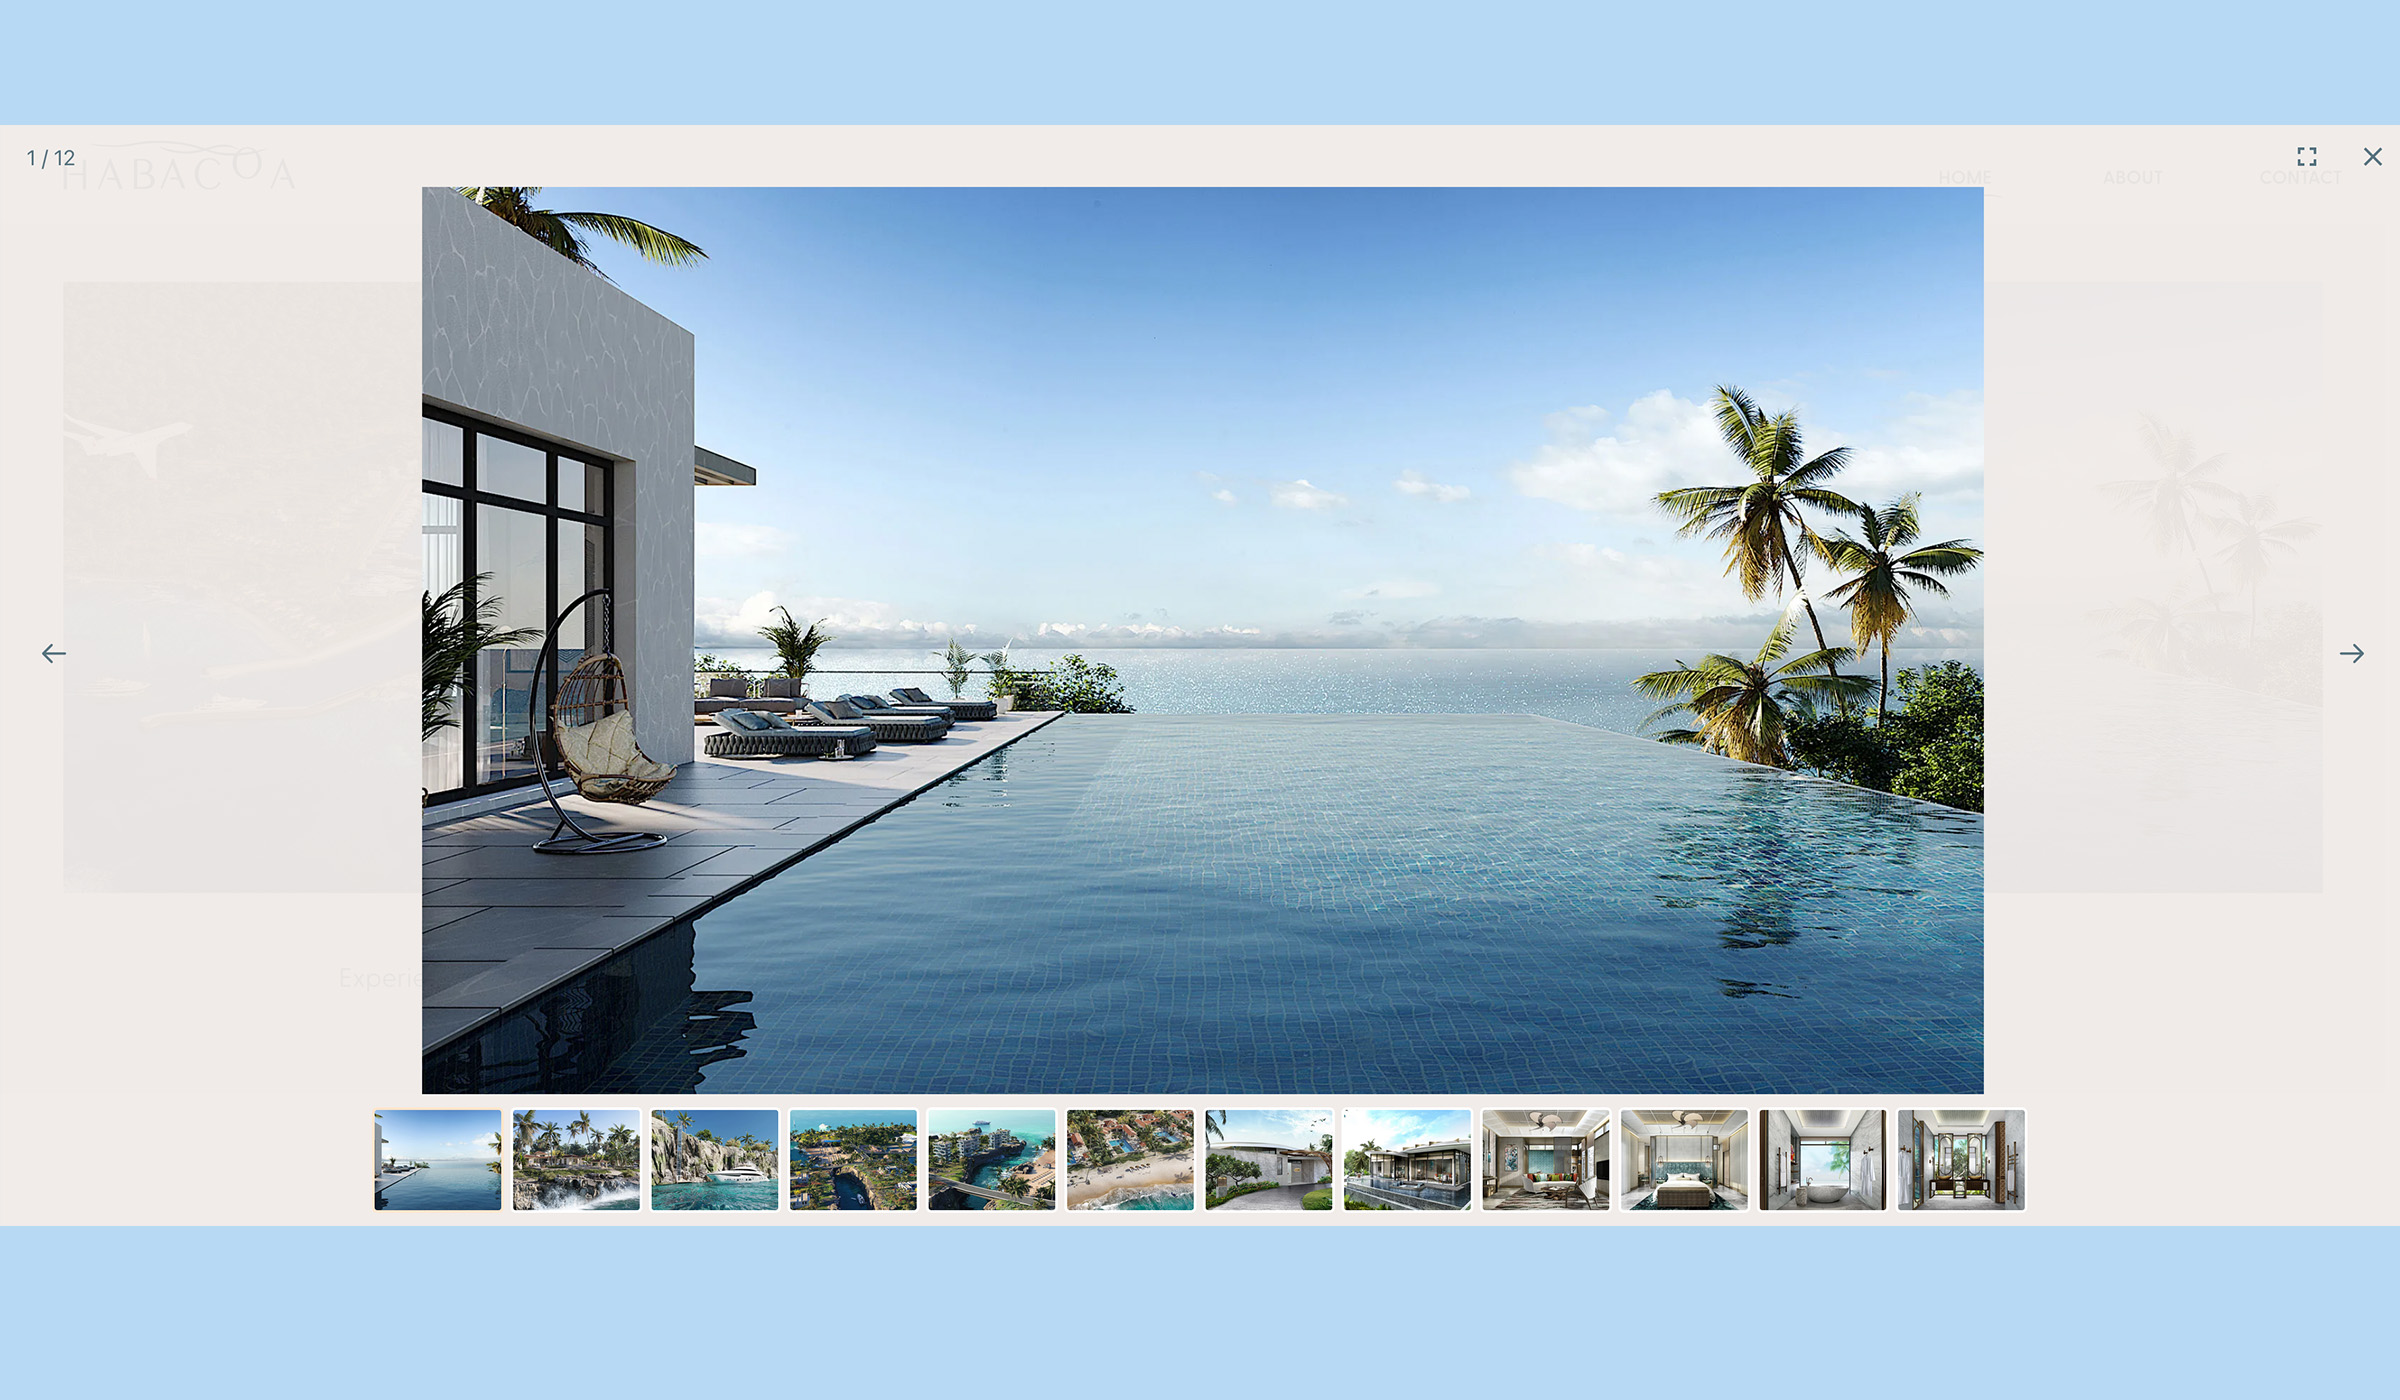 A Habacoa home design featuring an infinity pool and turquoise water views.